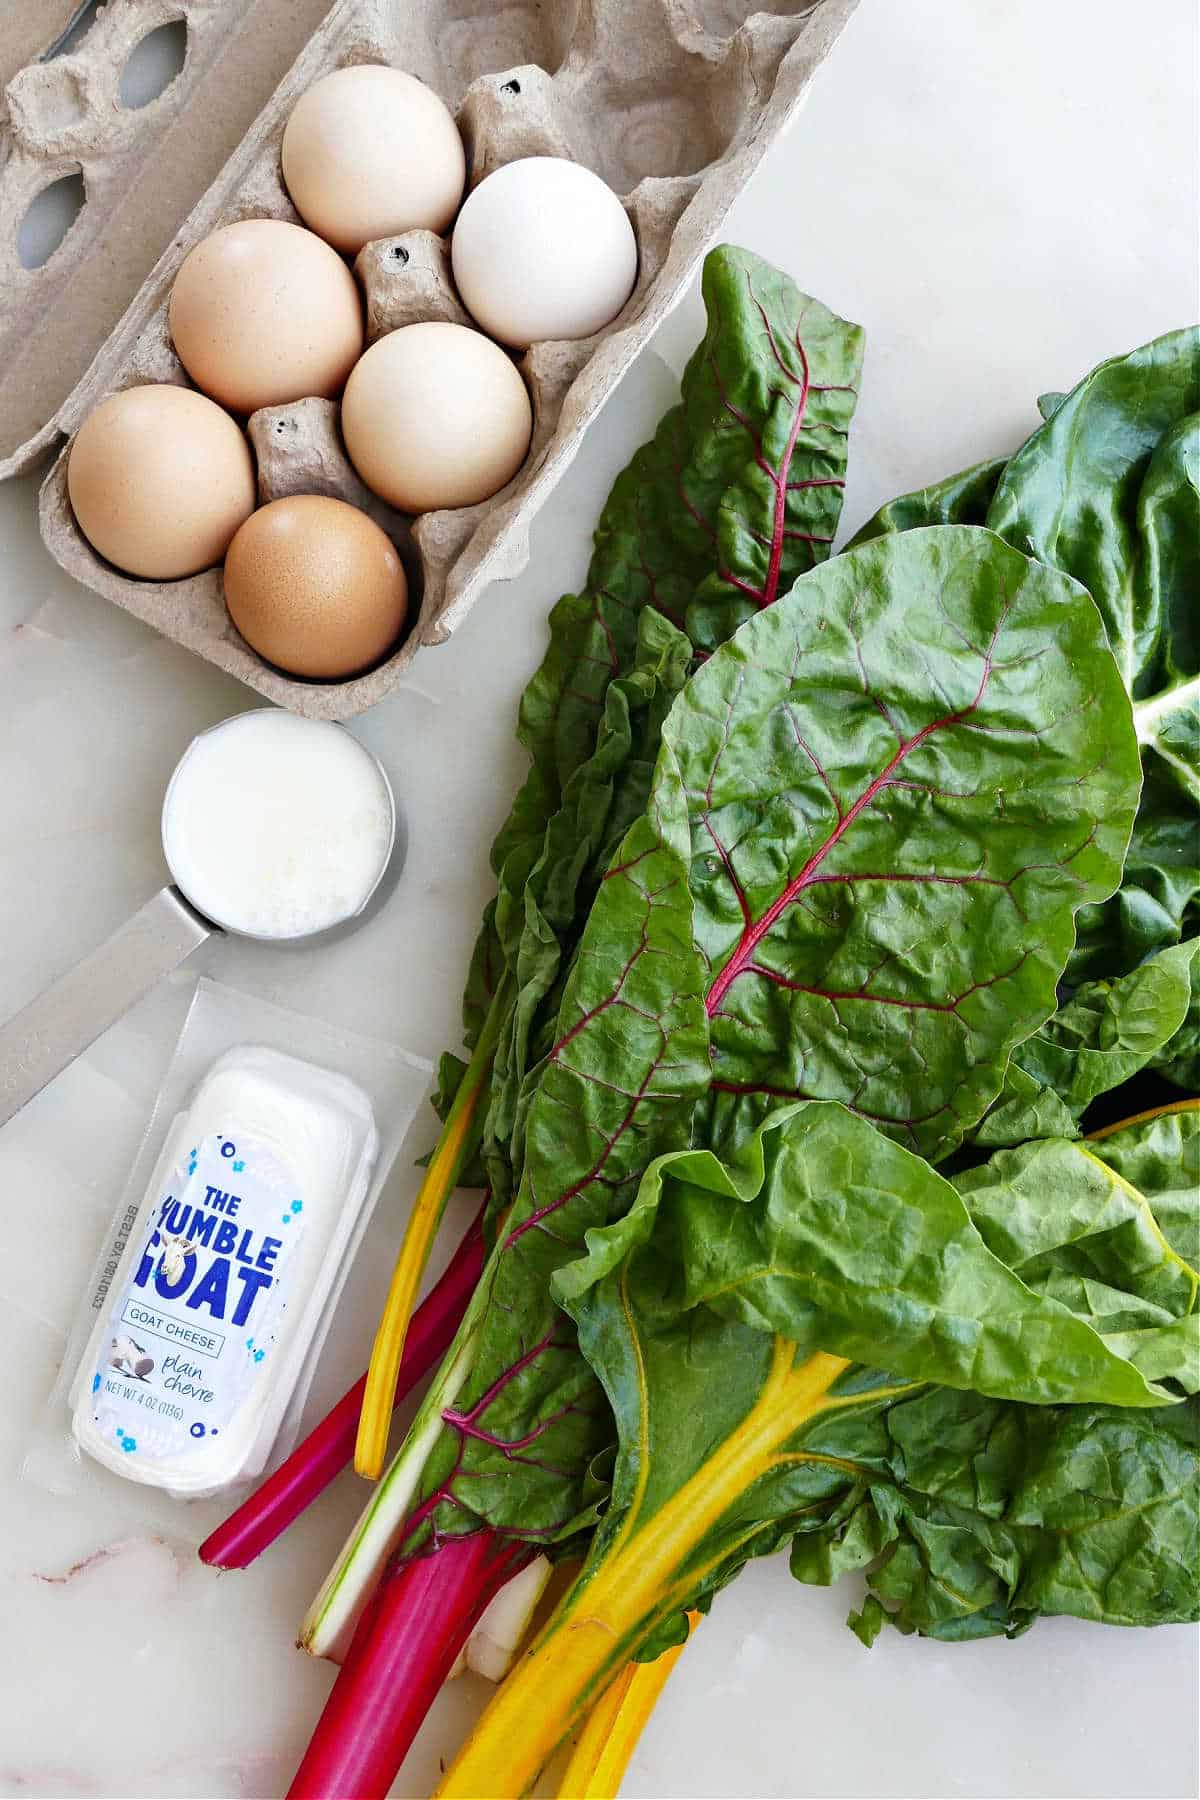 eggs, rainbow chard, goat cheese, and milk next to each other on a counter